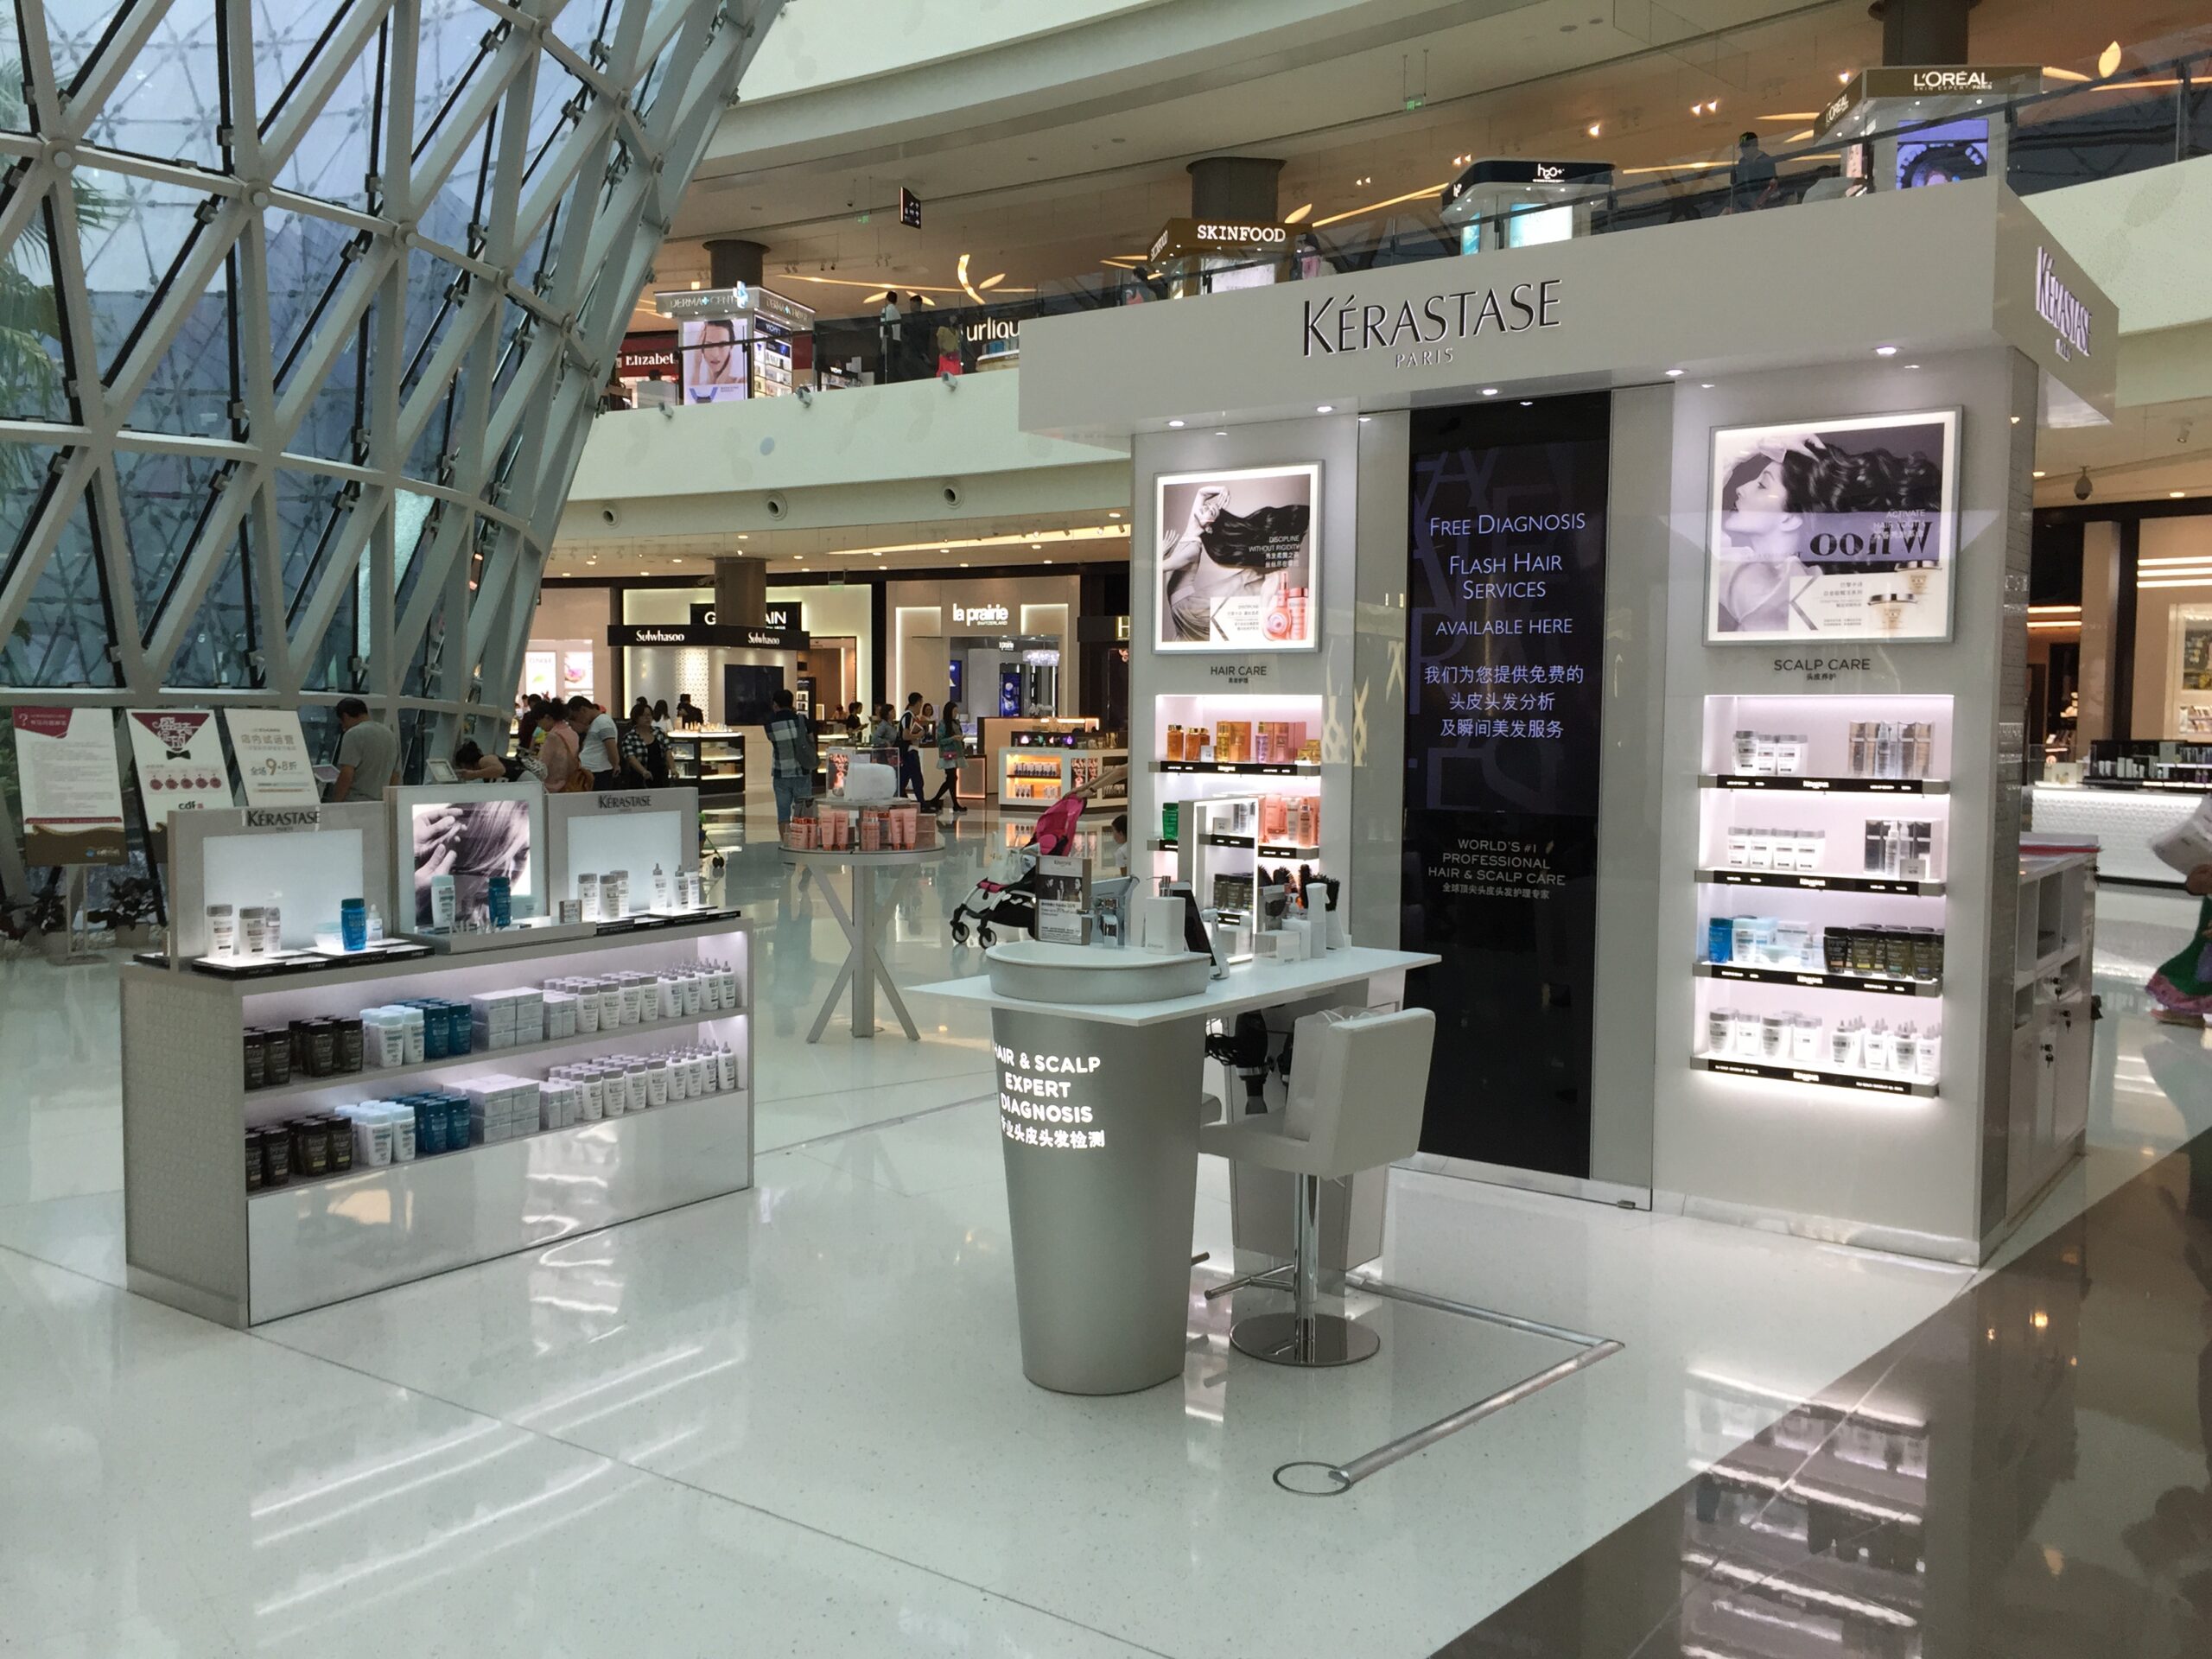 Sanya Haitang Bay: The Kérastase offer appeals to both male and female customers 